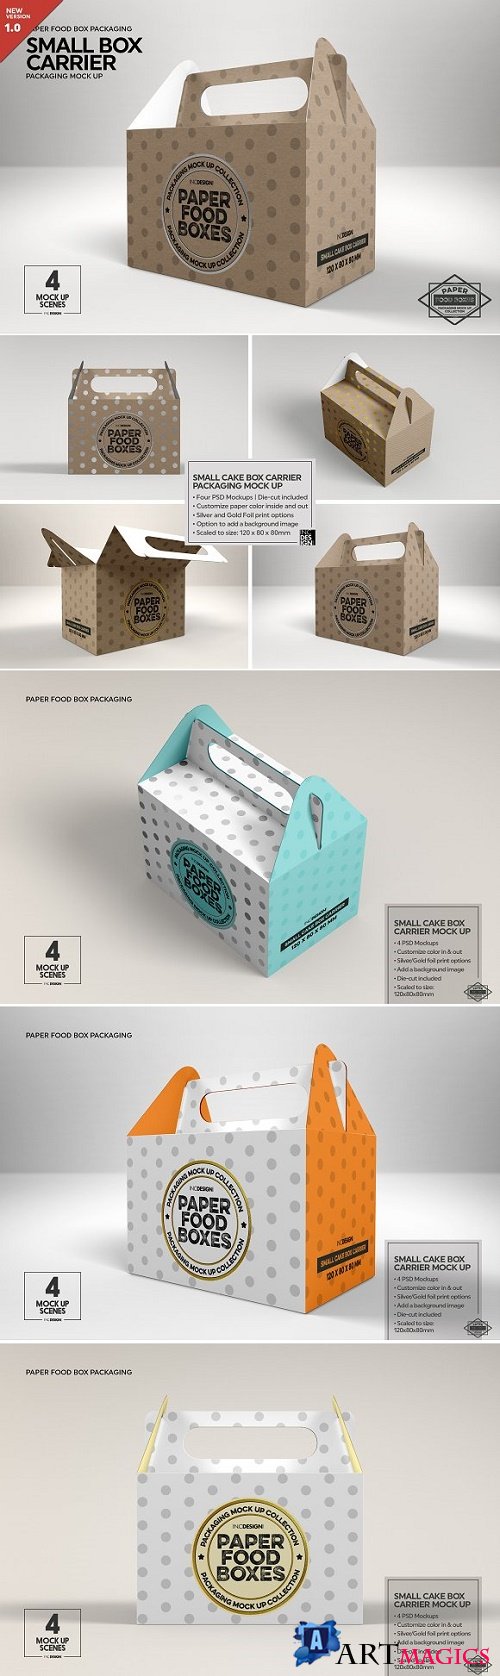 Small Box Carrier Packaging Mockup - 2599527